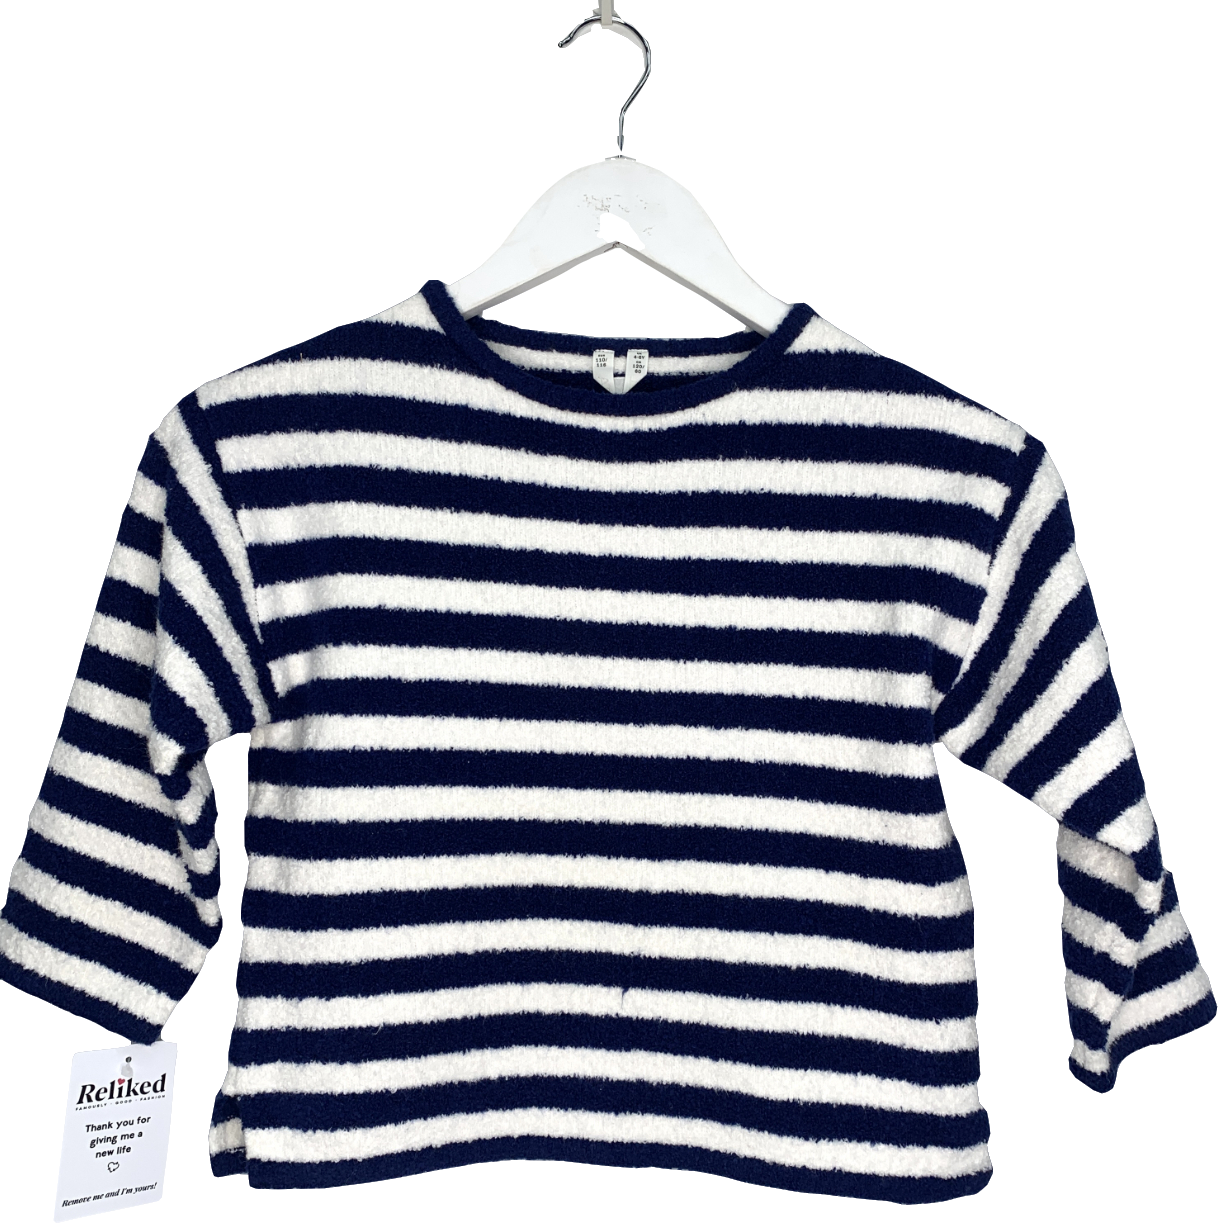 Arket Blue Fluffy Knit Relaxed Sweater 2-4 Years 4 Years